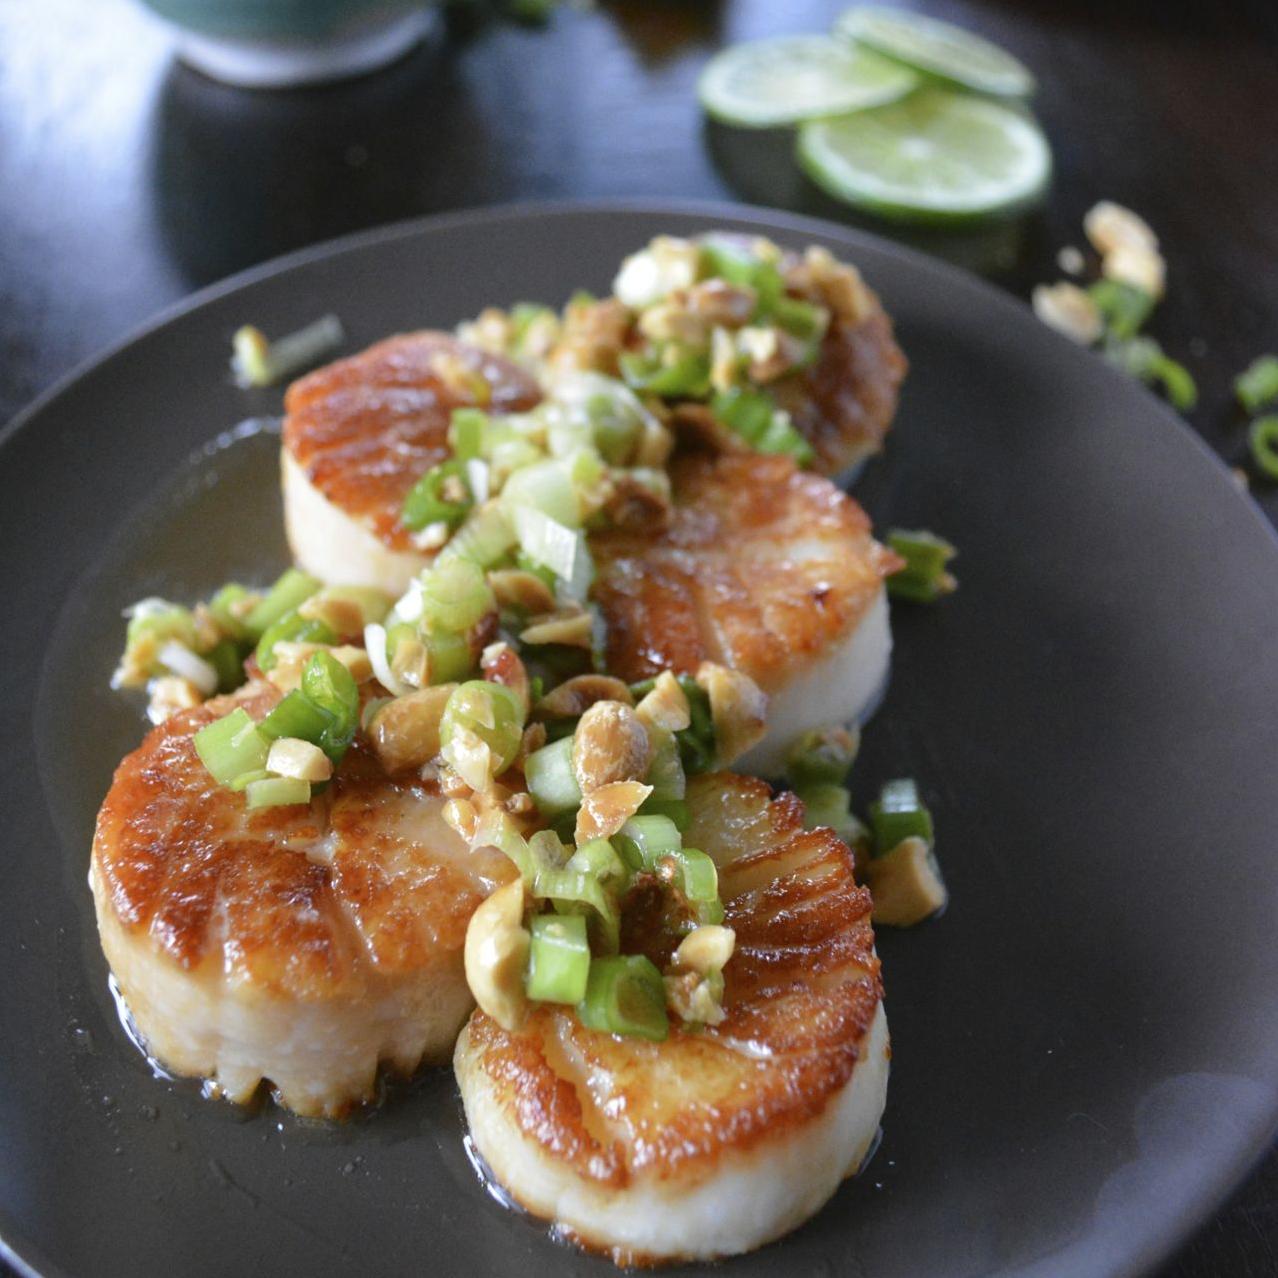  Using a wok ensures that the scallops cook evenly and quickly.